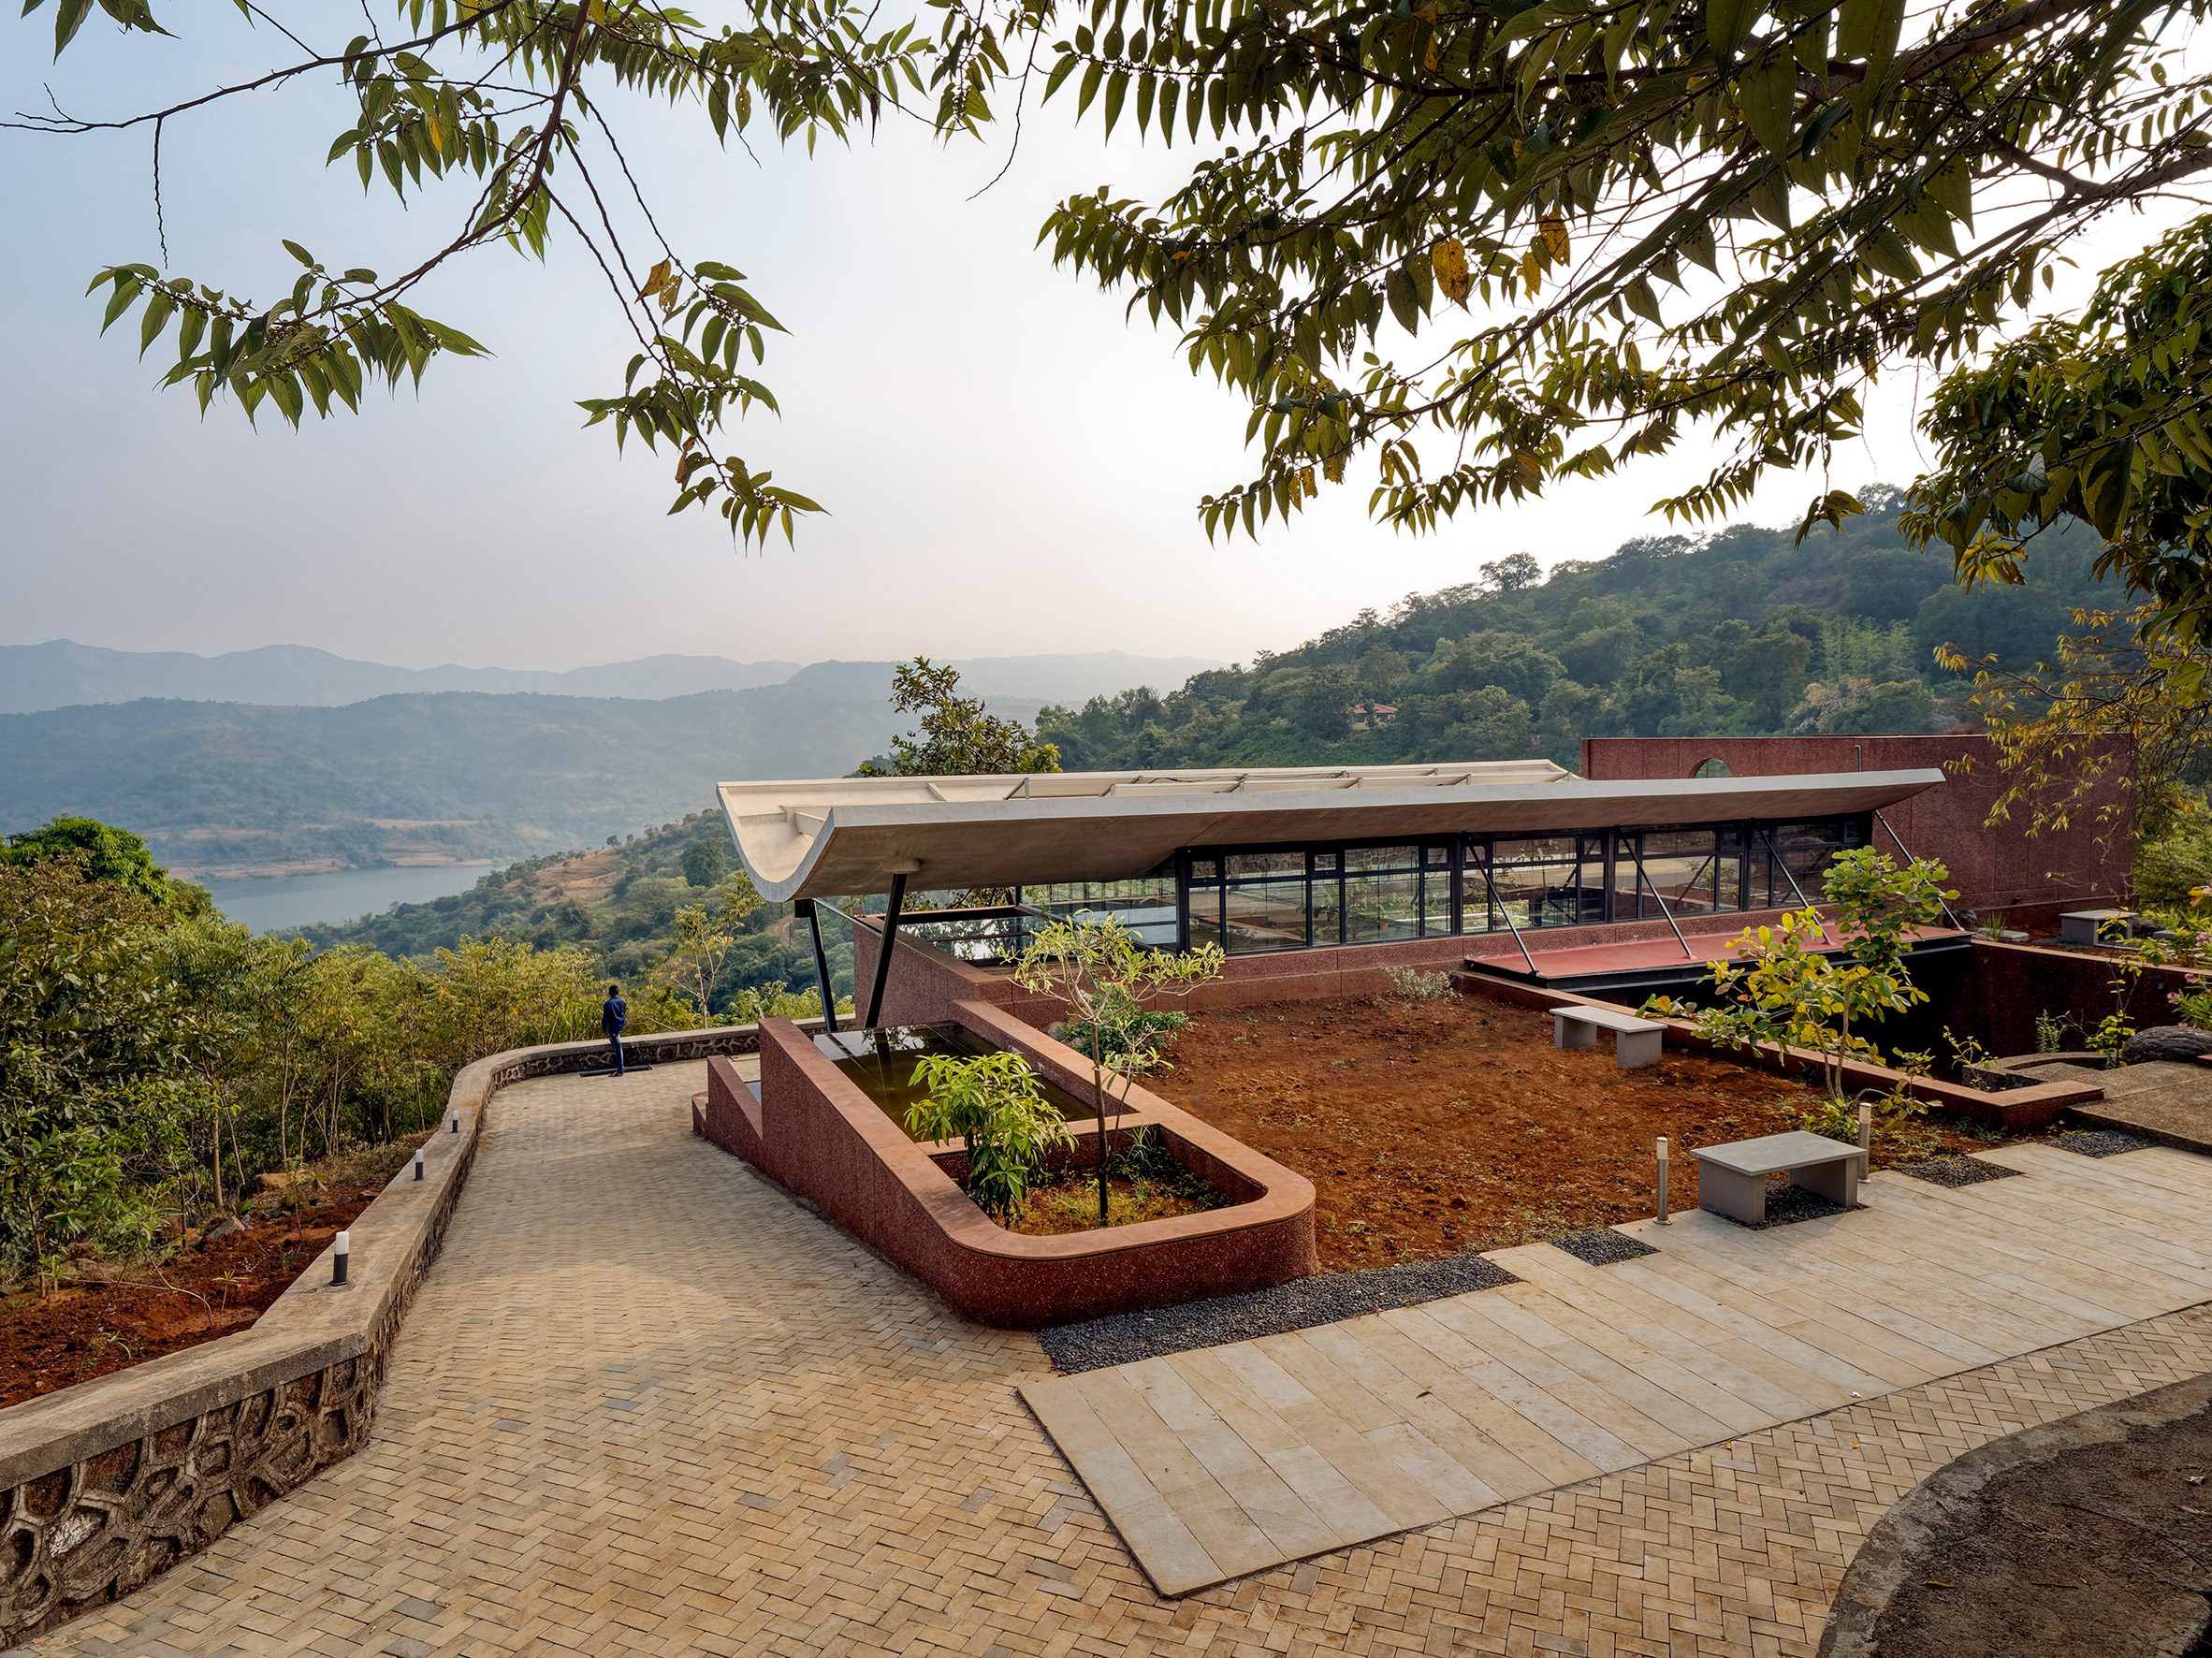 A brick house overlooking the Western Ghats mountain range